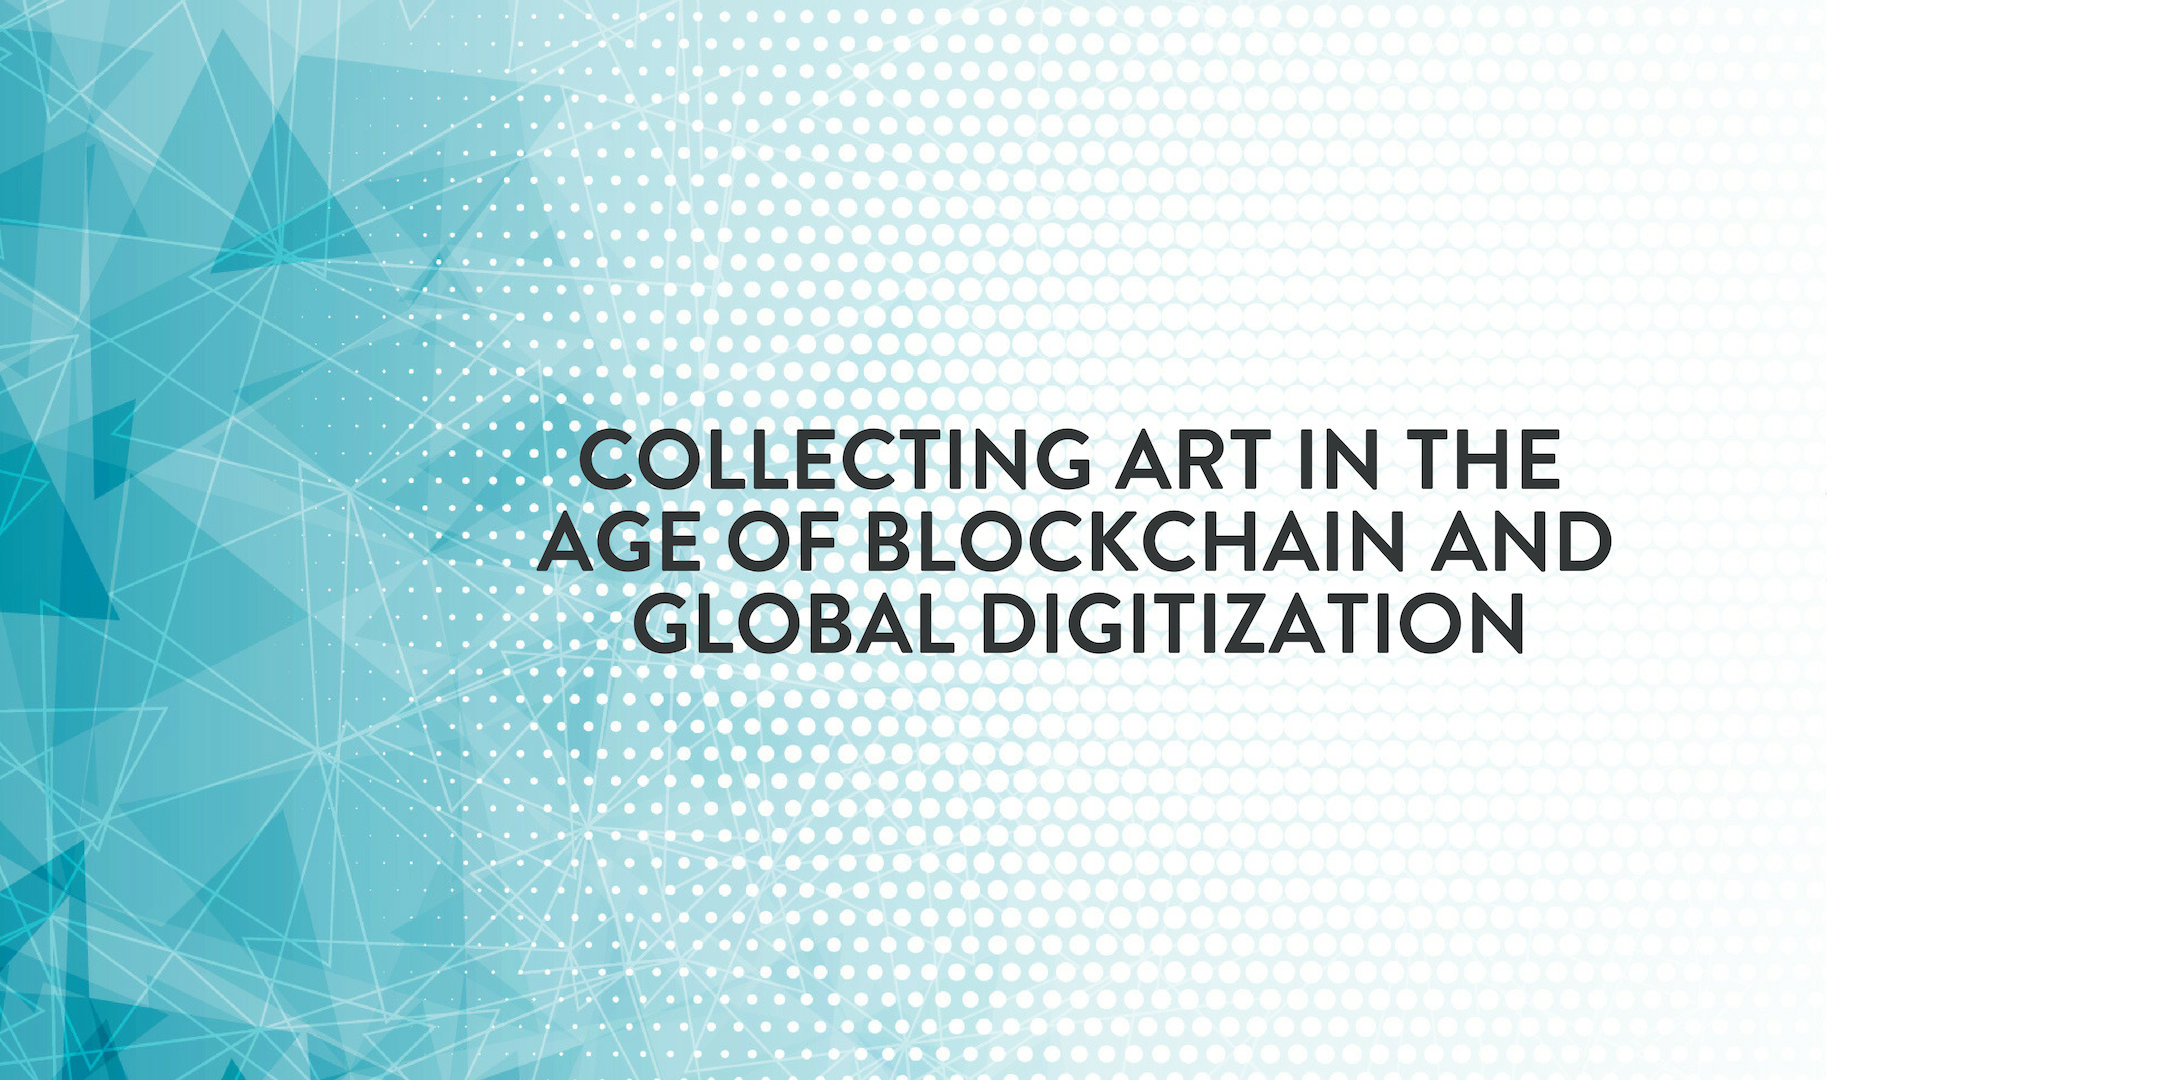 Collecting Art in the Age of Blockchain and Global Digitization